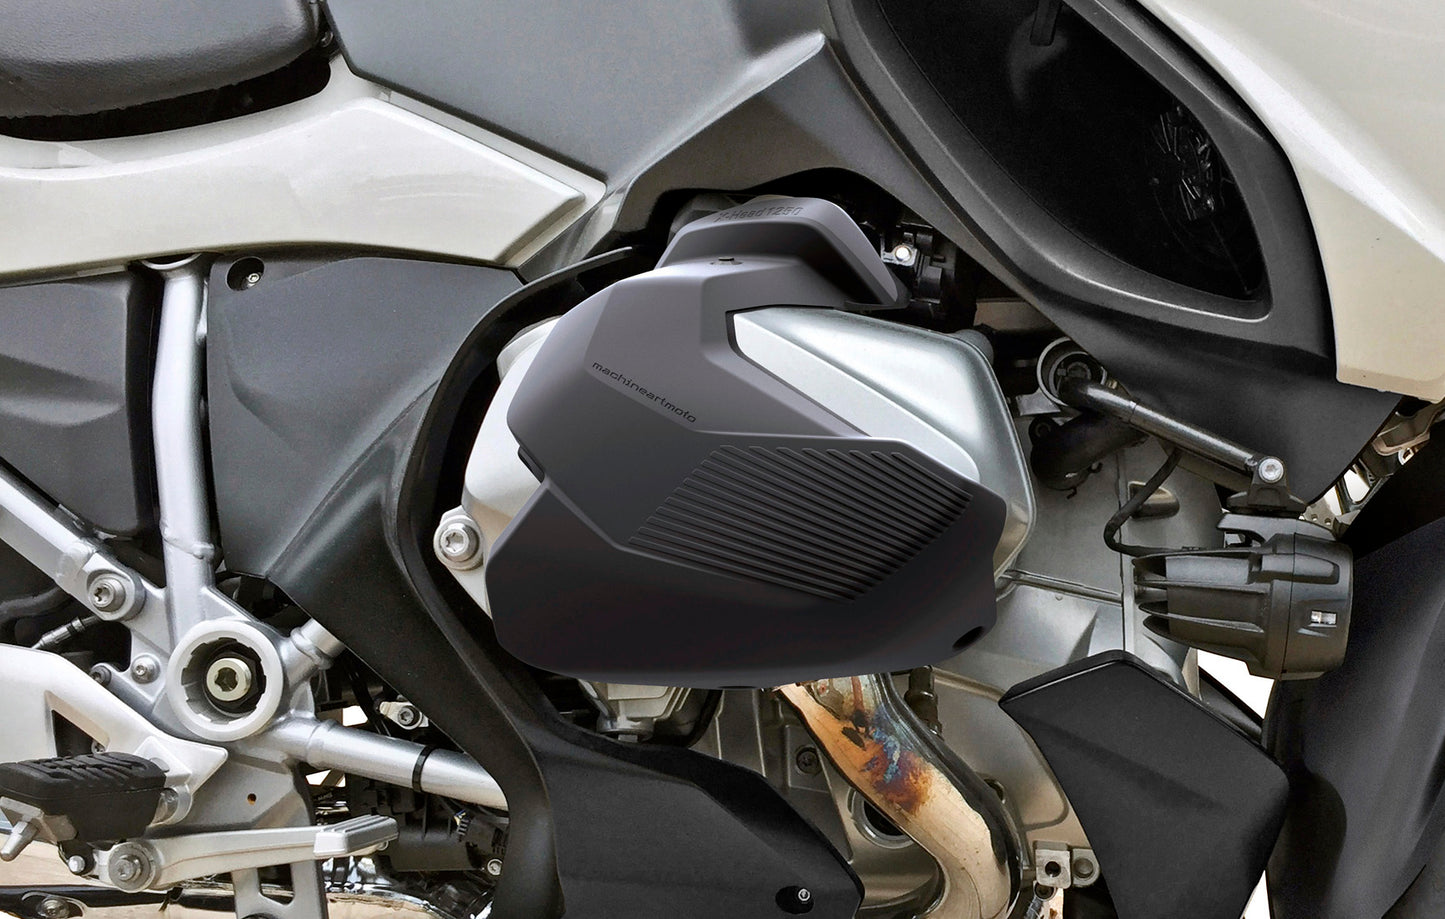 X-Head 1250 cylinder guard mounted to BMW R1250 RT